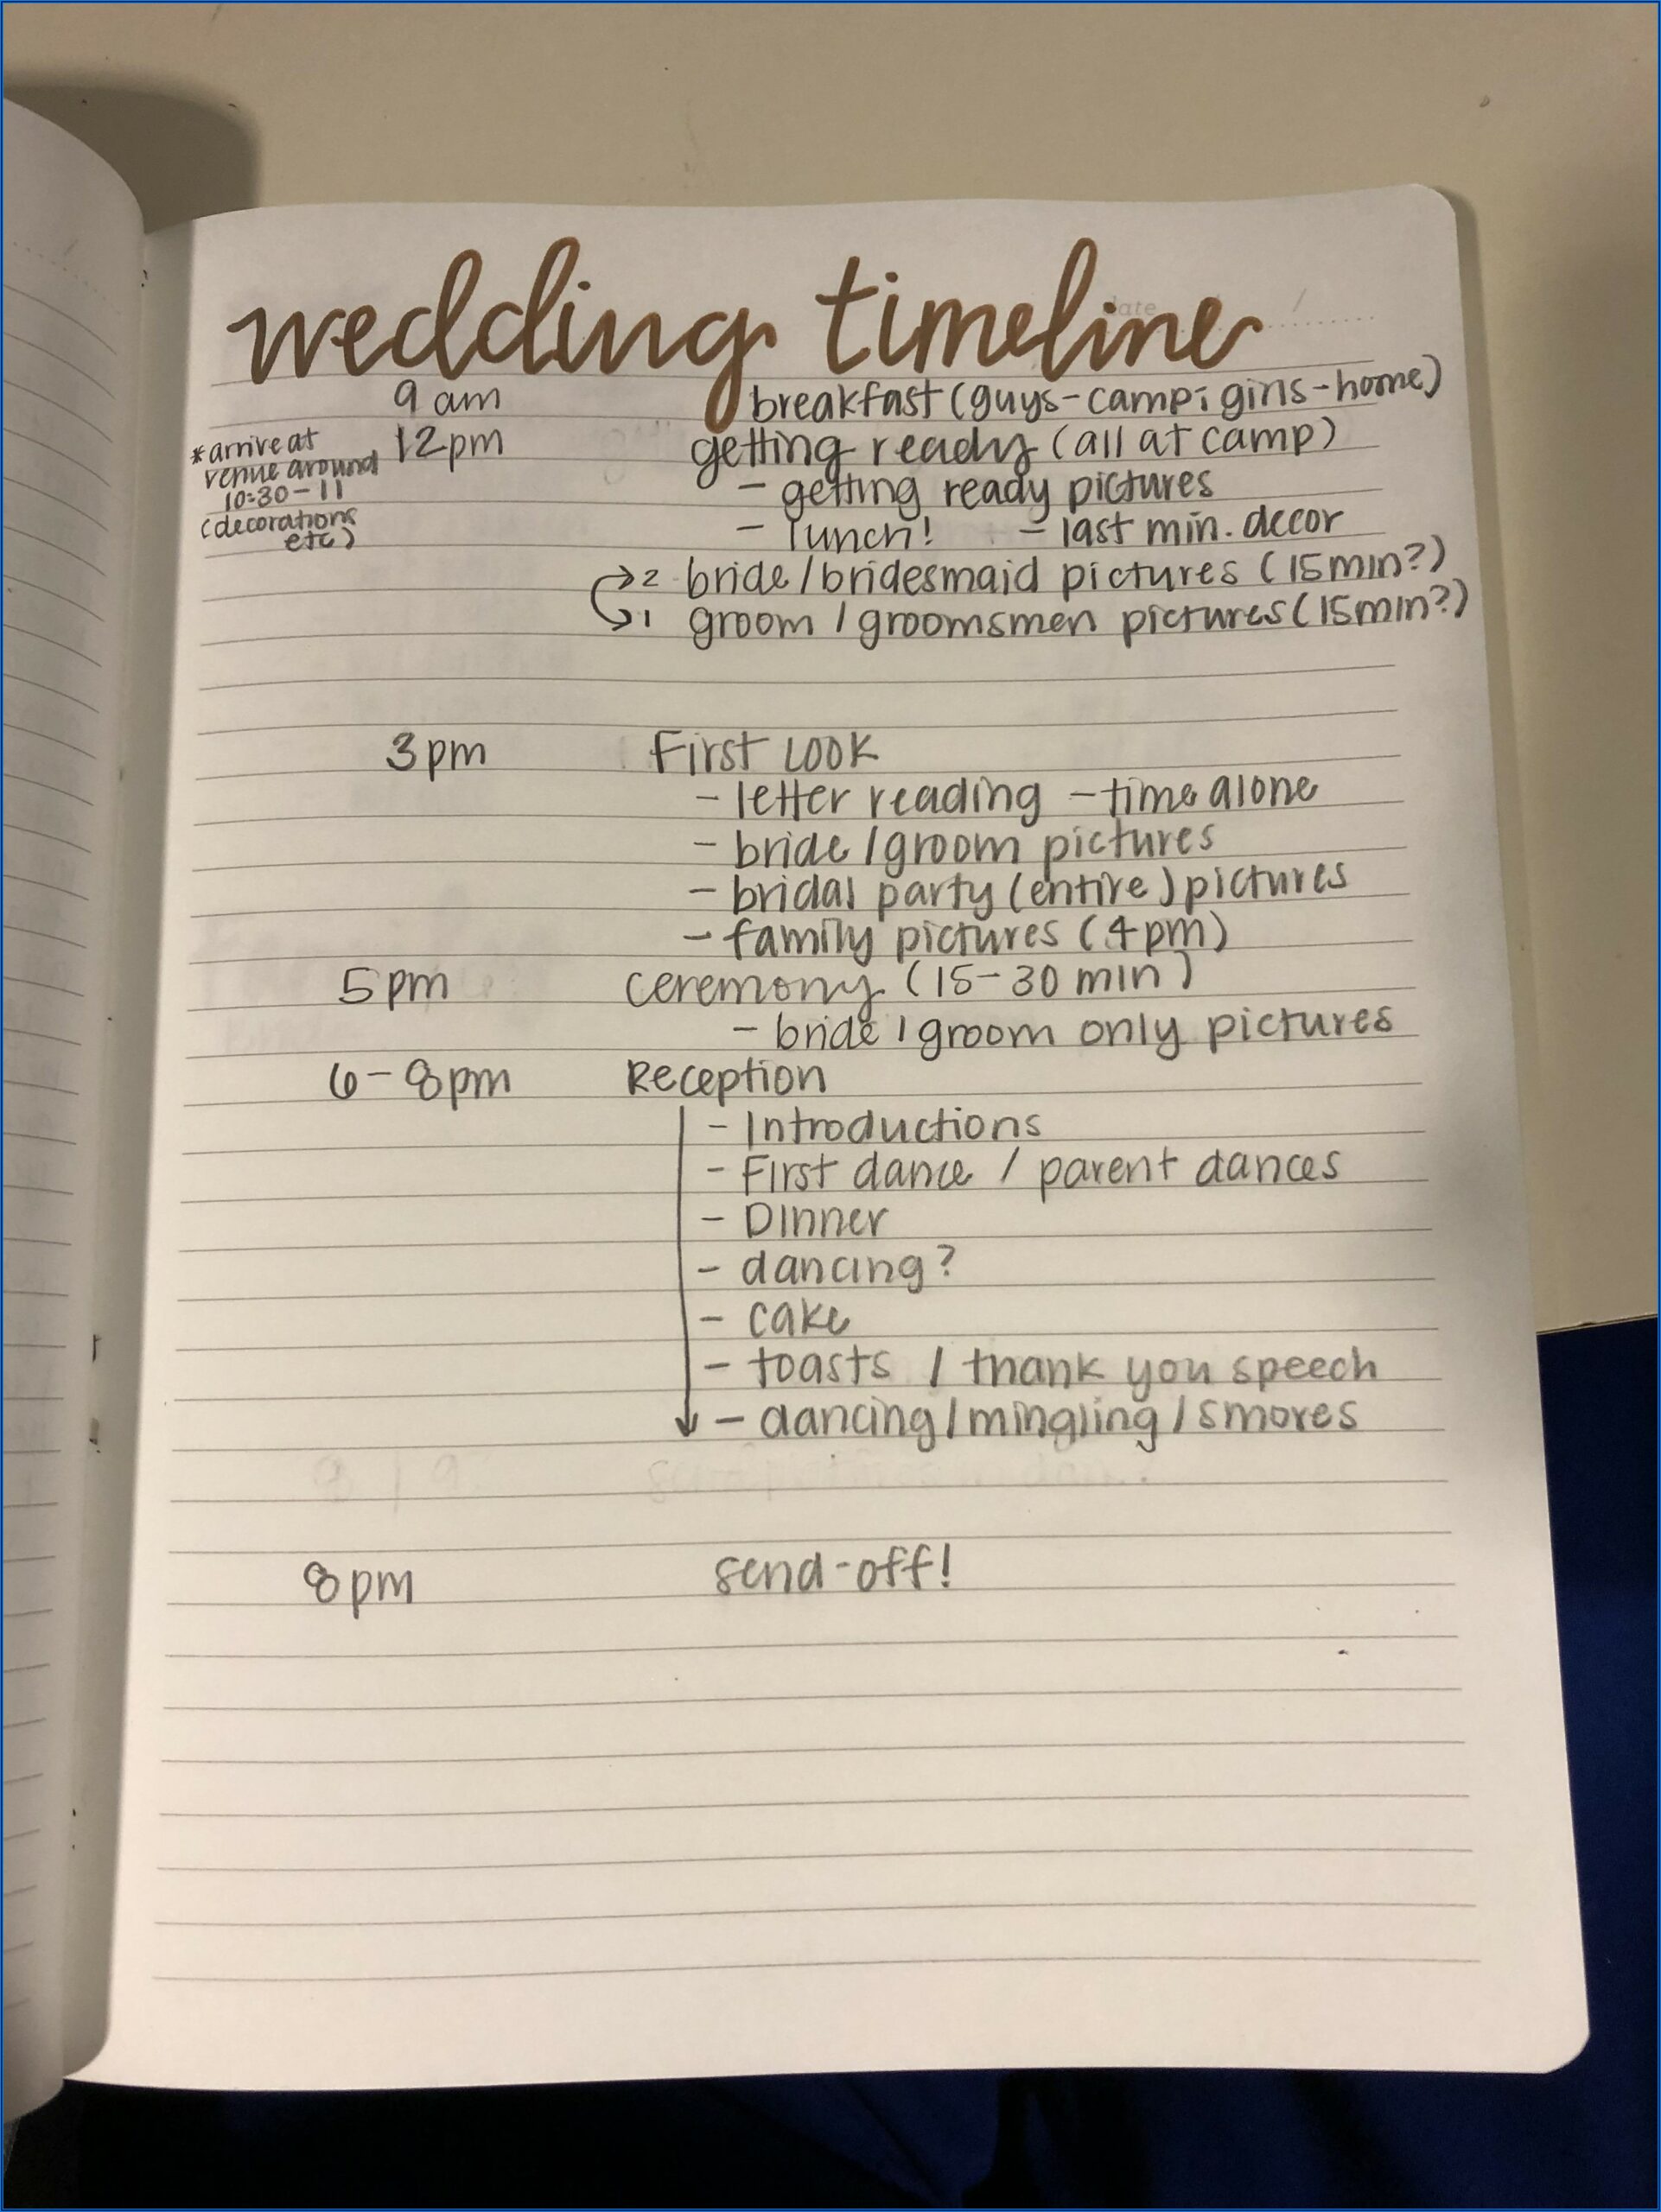 Wedding Day Timeline 4pm Ceremony With First Look